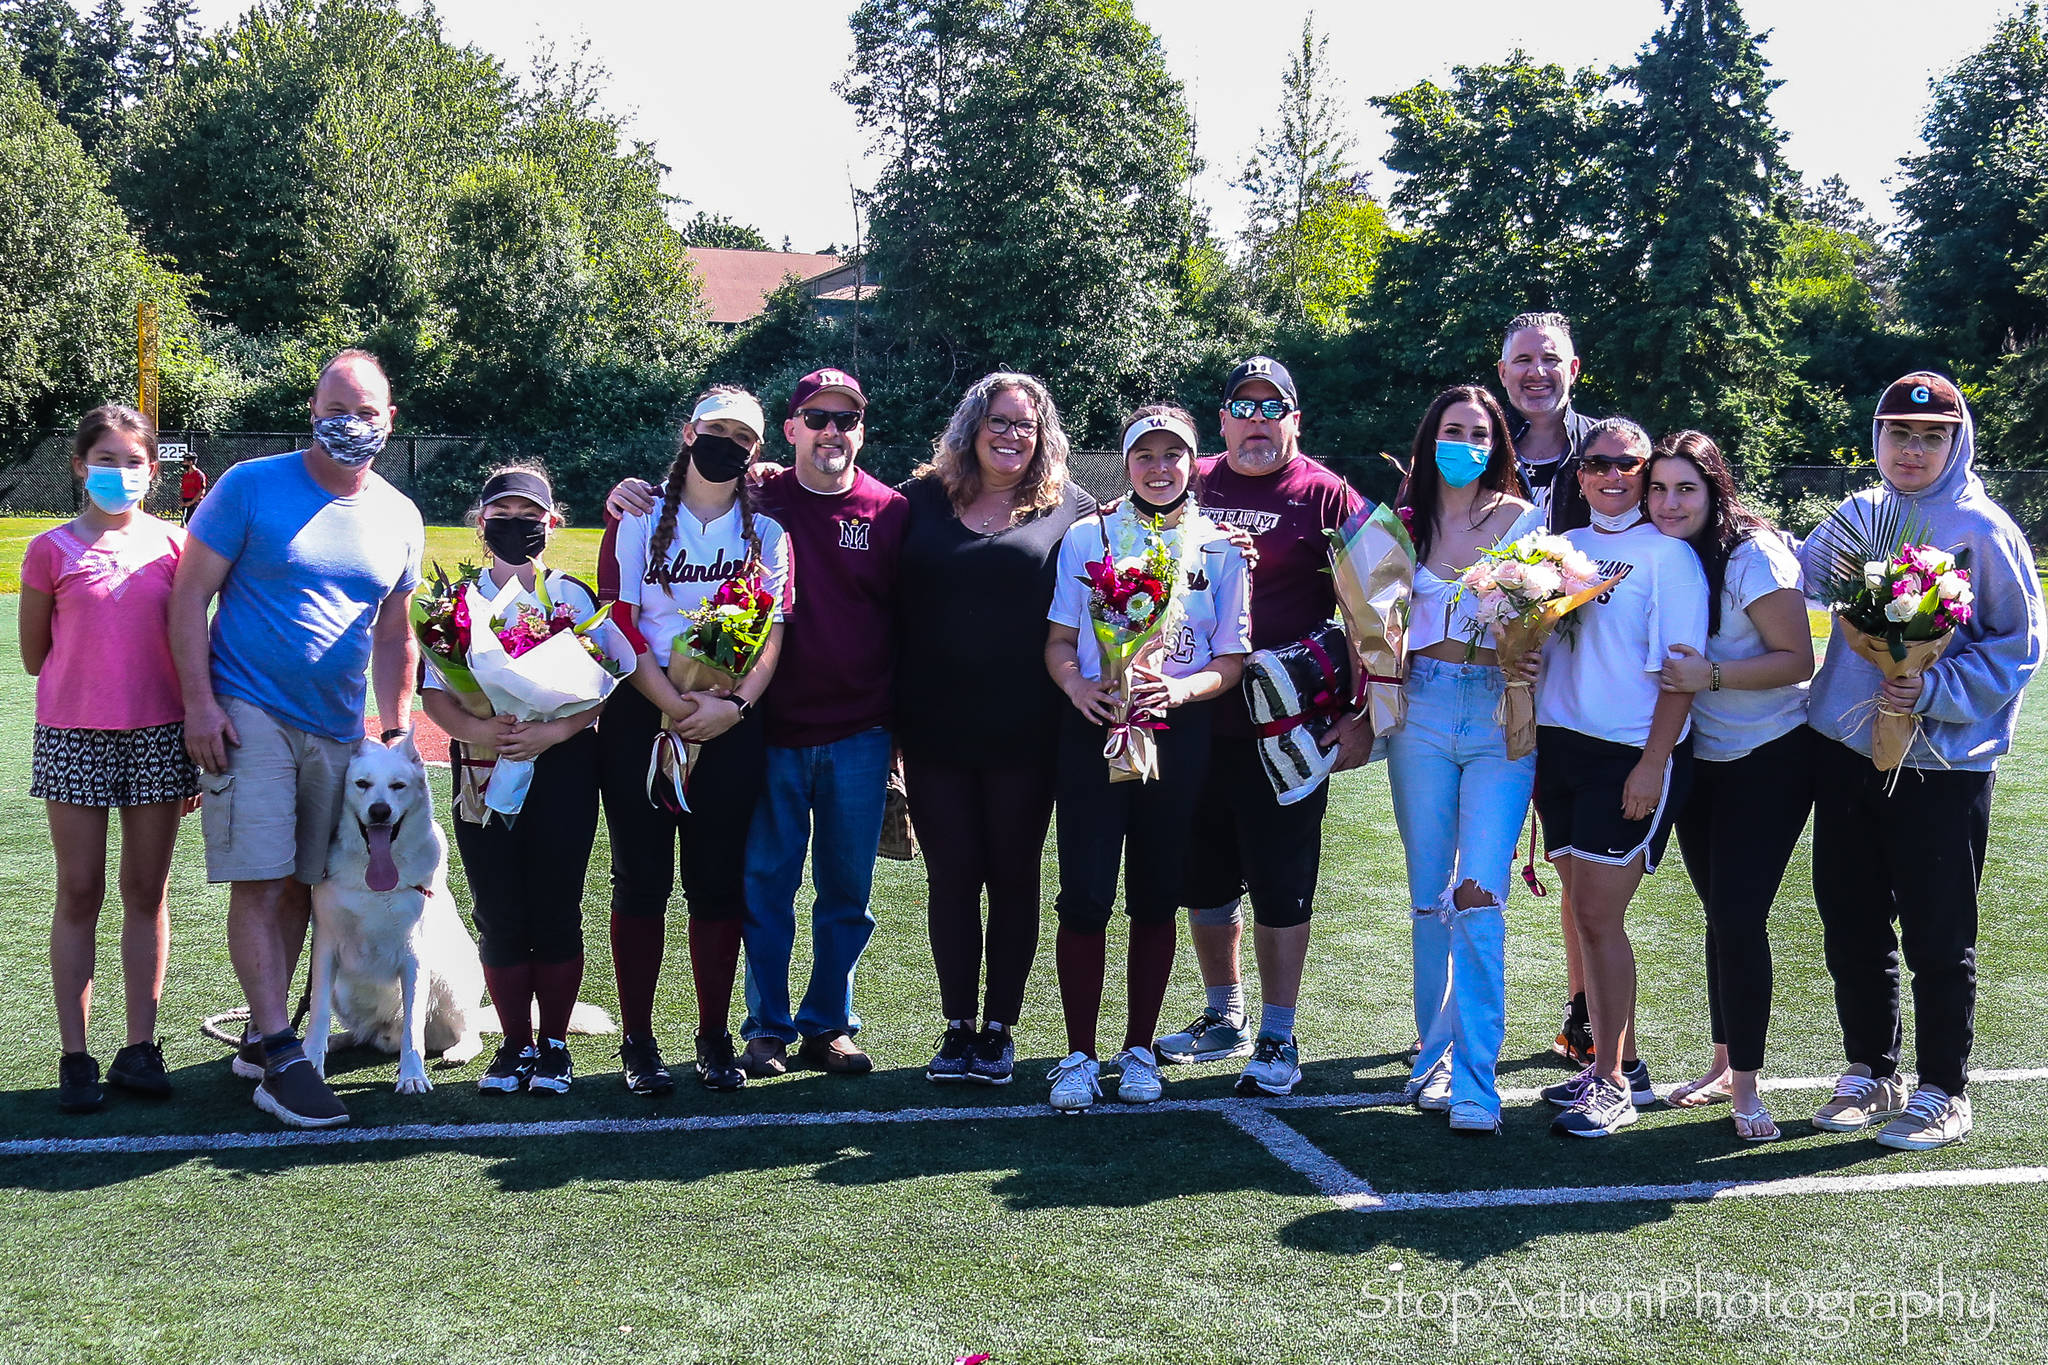 Senior Mercer Island High School fastpitch players, from left to right, Lauren Majewski #21, Chloe Larson #8, Michelle Lyon #16 and Charlise Barokas #7 (not in uniform) gather with their families on senior night on June 4. Photo courtesy of Don Borin/ StopActionPhotography